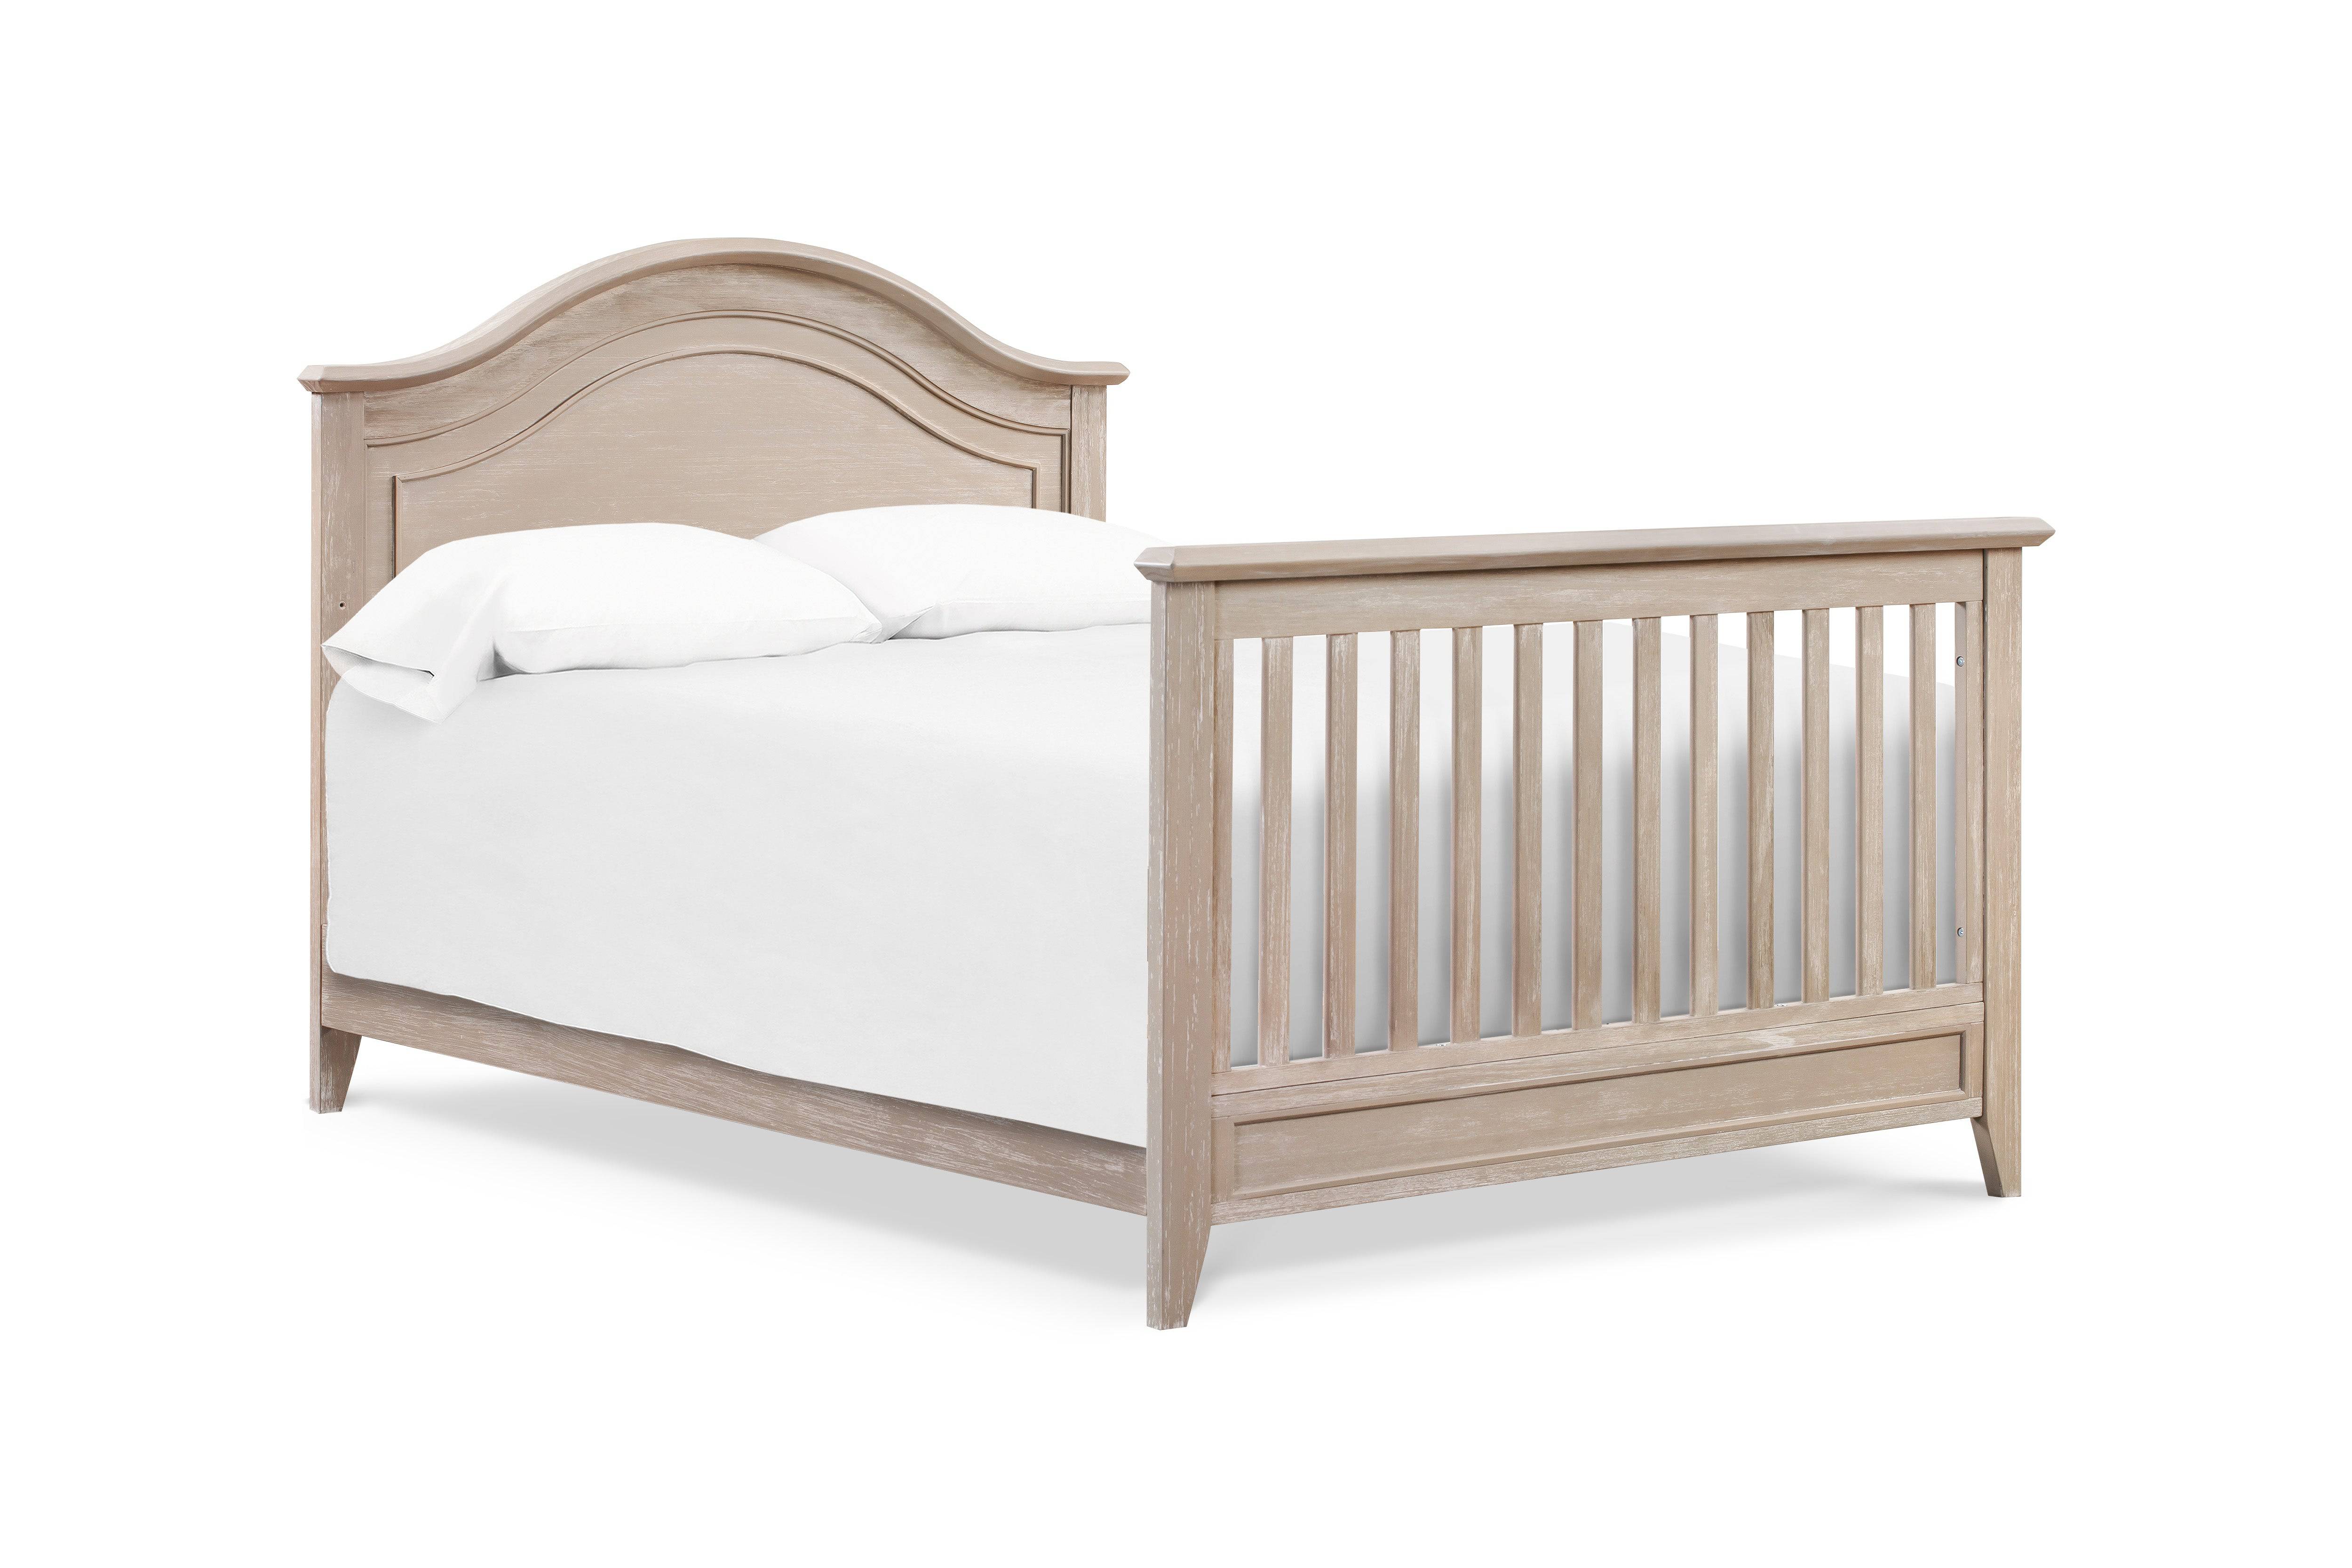 Beckett Rustic 4-in-1 Convertible Curve Top Crib - Twinkle Twinkle Little One